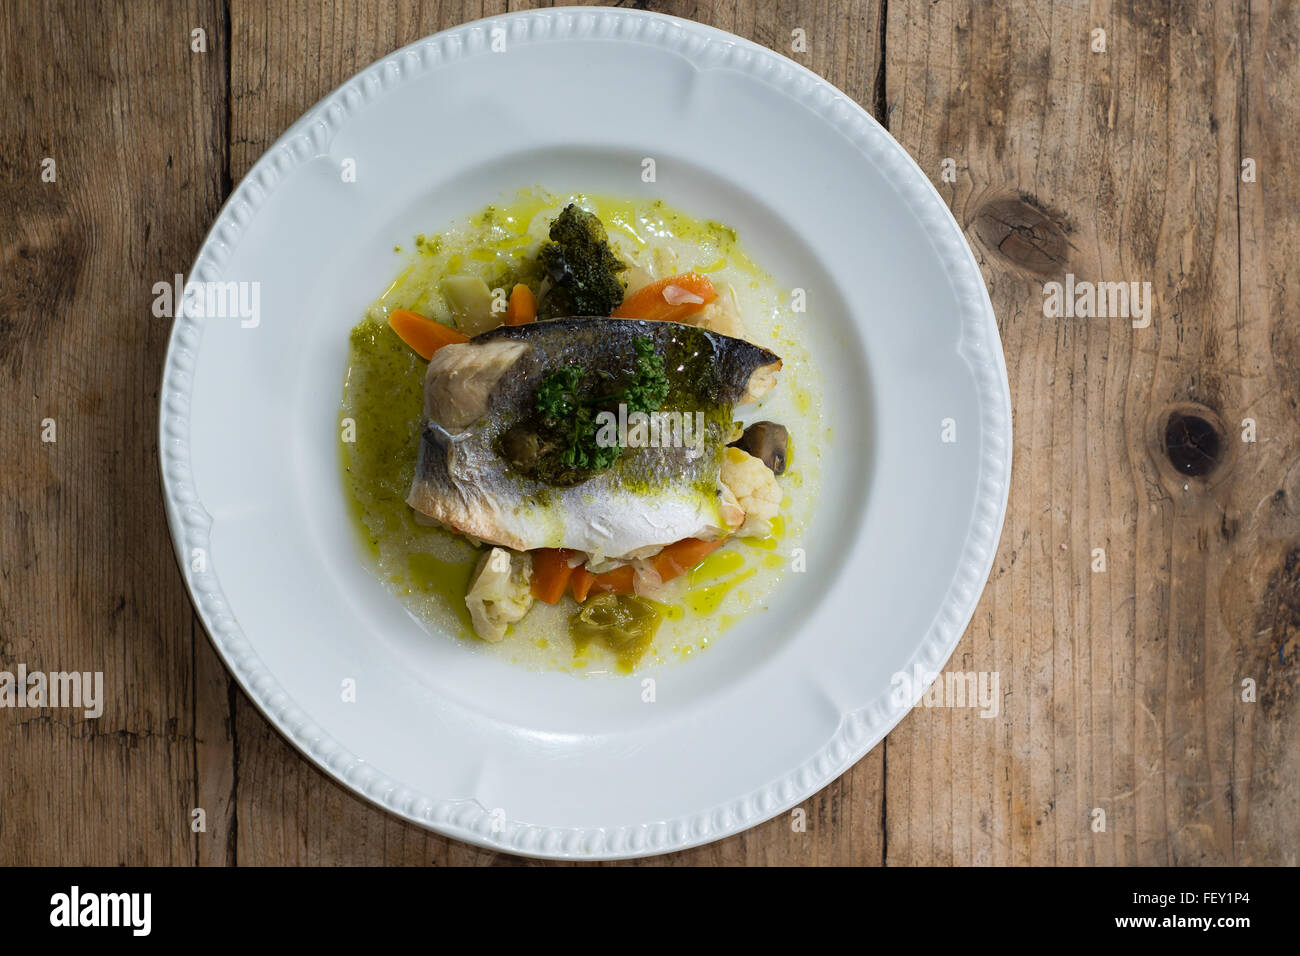 Sea bass with mixed seasonal vegetables on plate. Seabass fillet, mixed seasonal vegetables, lemon-herbs-caper butter Stock Photo